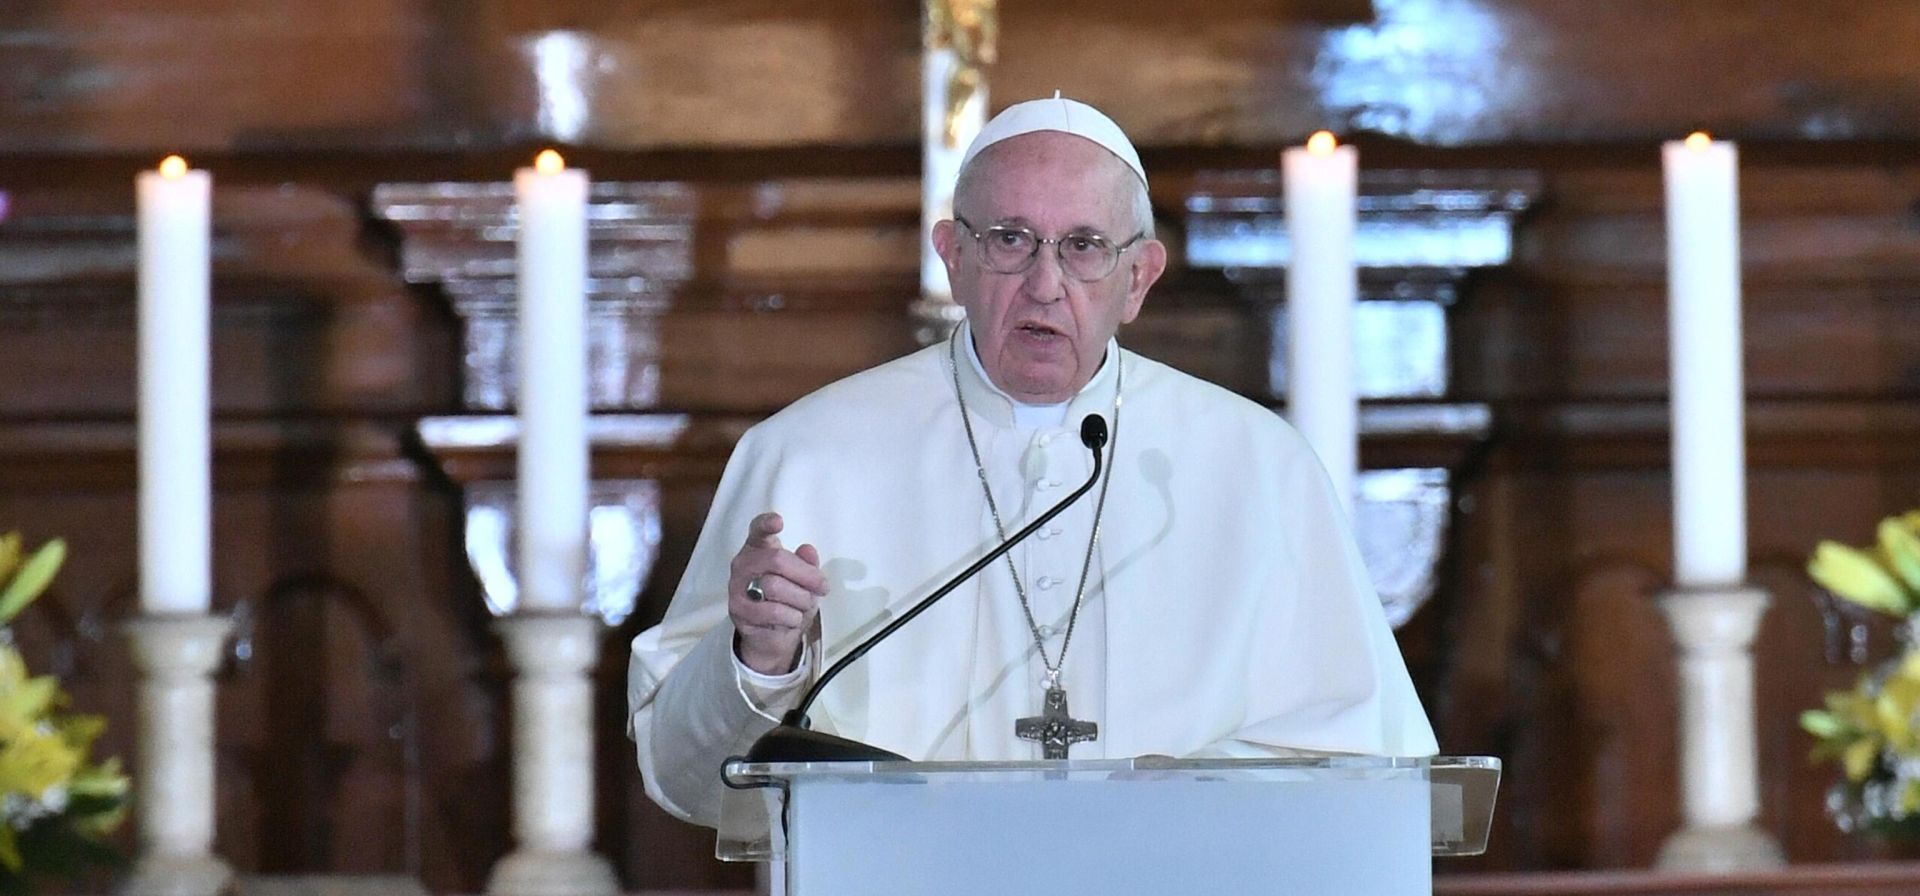 epa07044972 Pope Francis speaks during the Ecumenical meeting with the youth in Charles Church (Kaarli kirik), Lutheran church in Tallinn, Estonia, 25 September 2018. Pope Francis is visiting Lithuania, Latvia and Estonia for the Apostolic Journey from 22 to 25 September 2018.  EPA/ALESSANDRO DI MEO